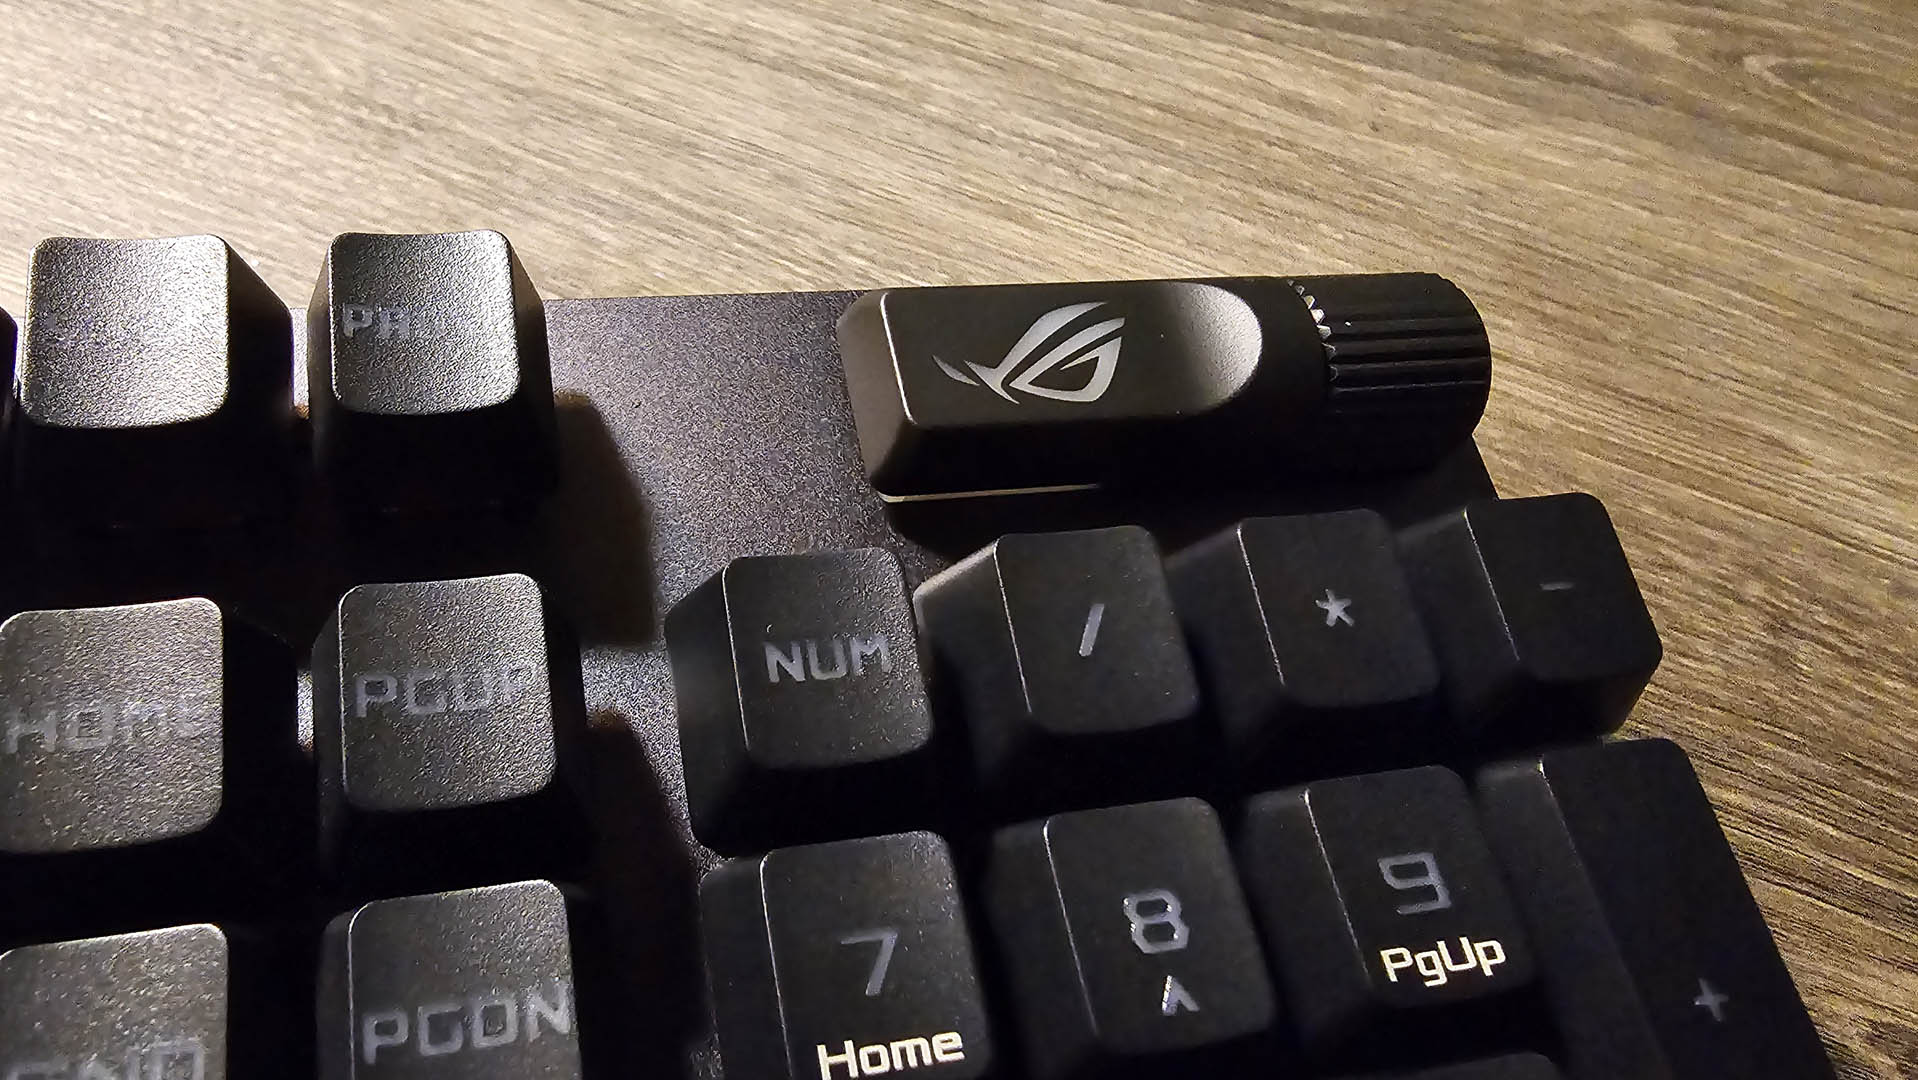 The Asus ROG Strix Scope II RX gaming keyboard photographed on a wooden desk.